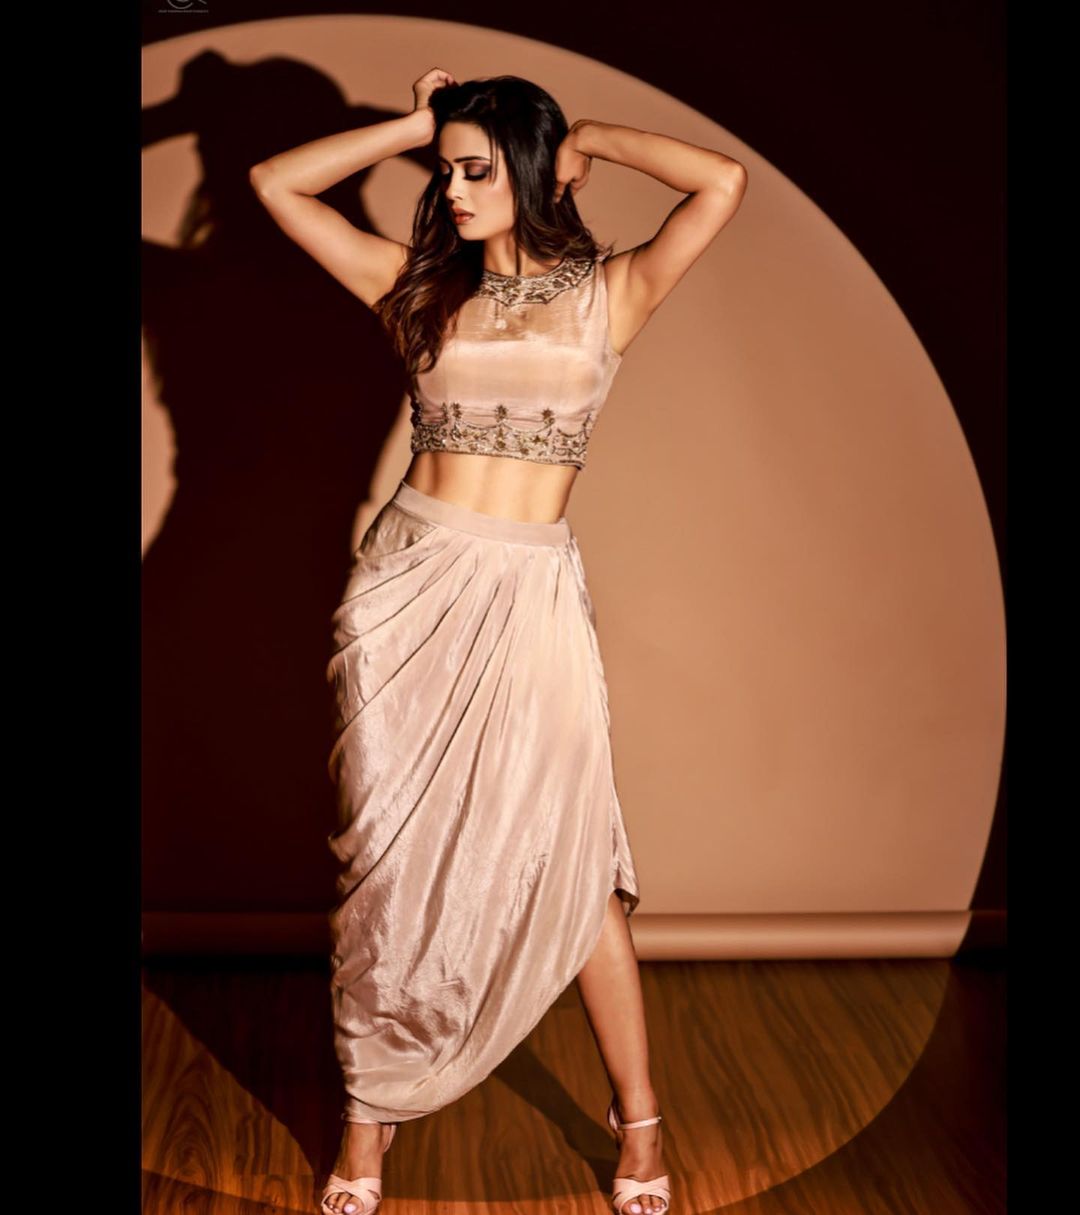 Shweta Tiwari shows off her toned abs in the pleated skirt and embellished blouse. 